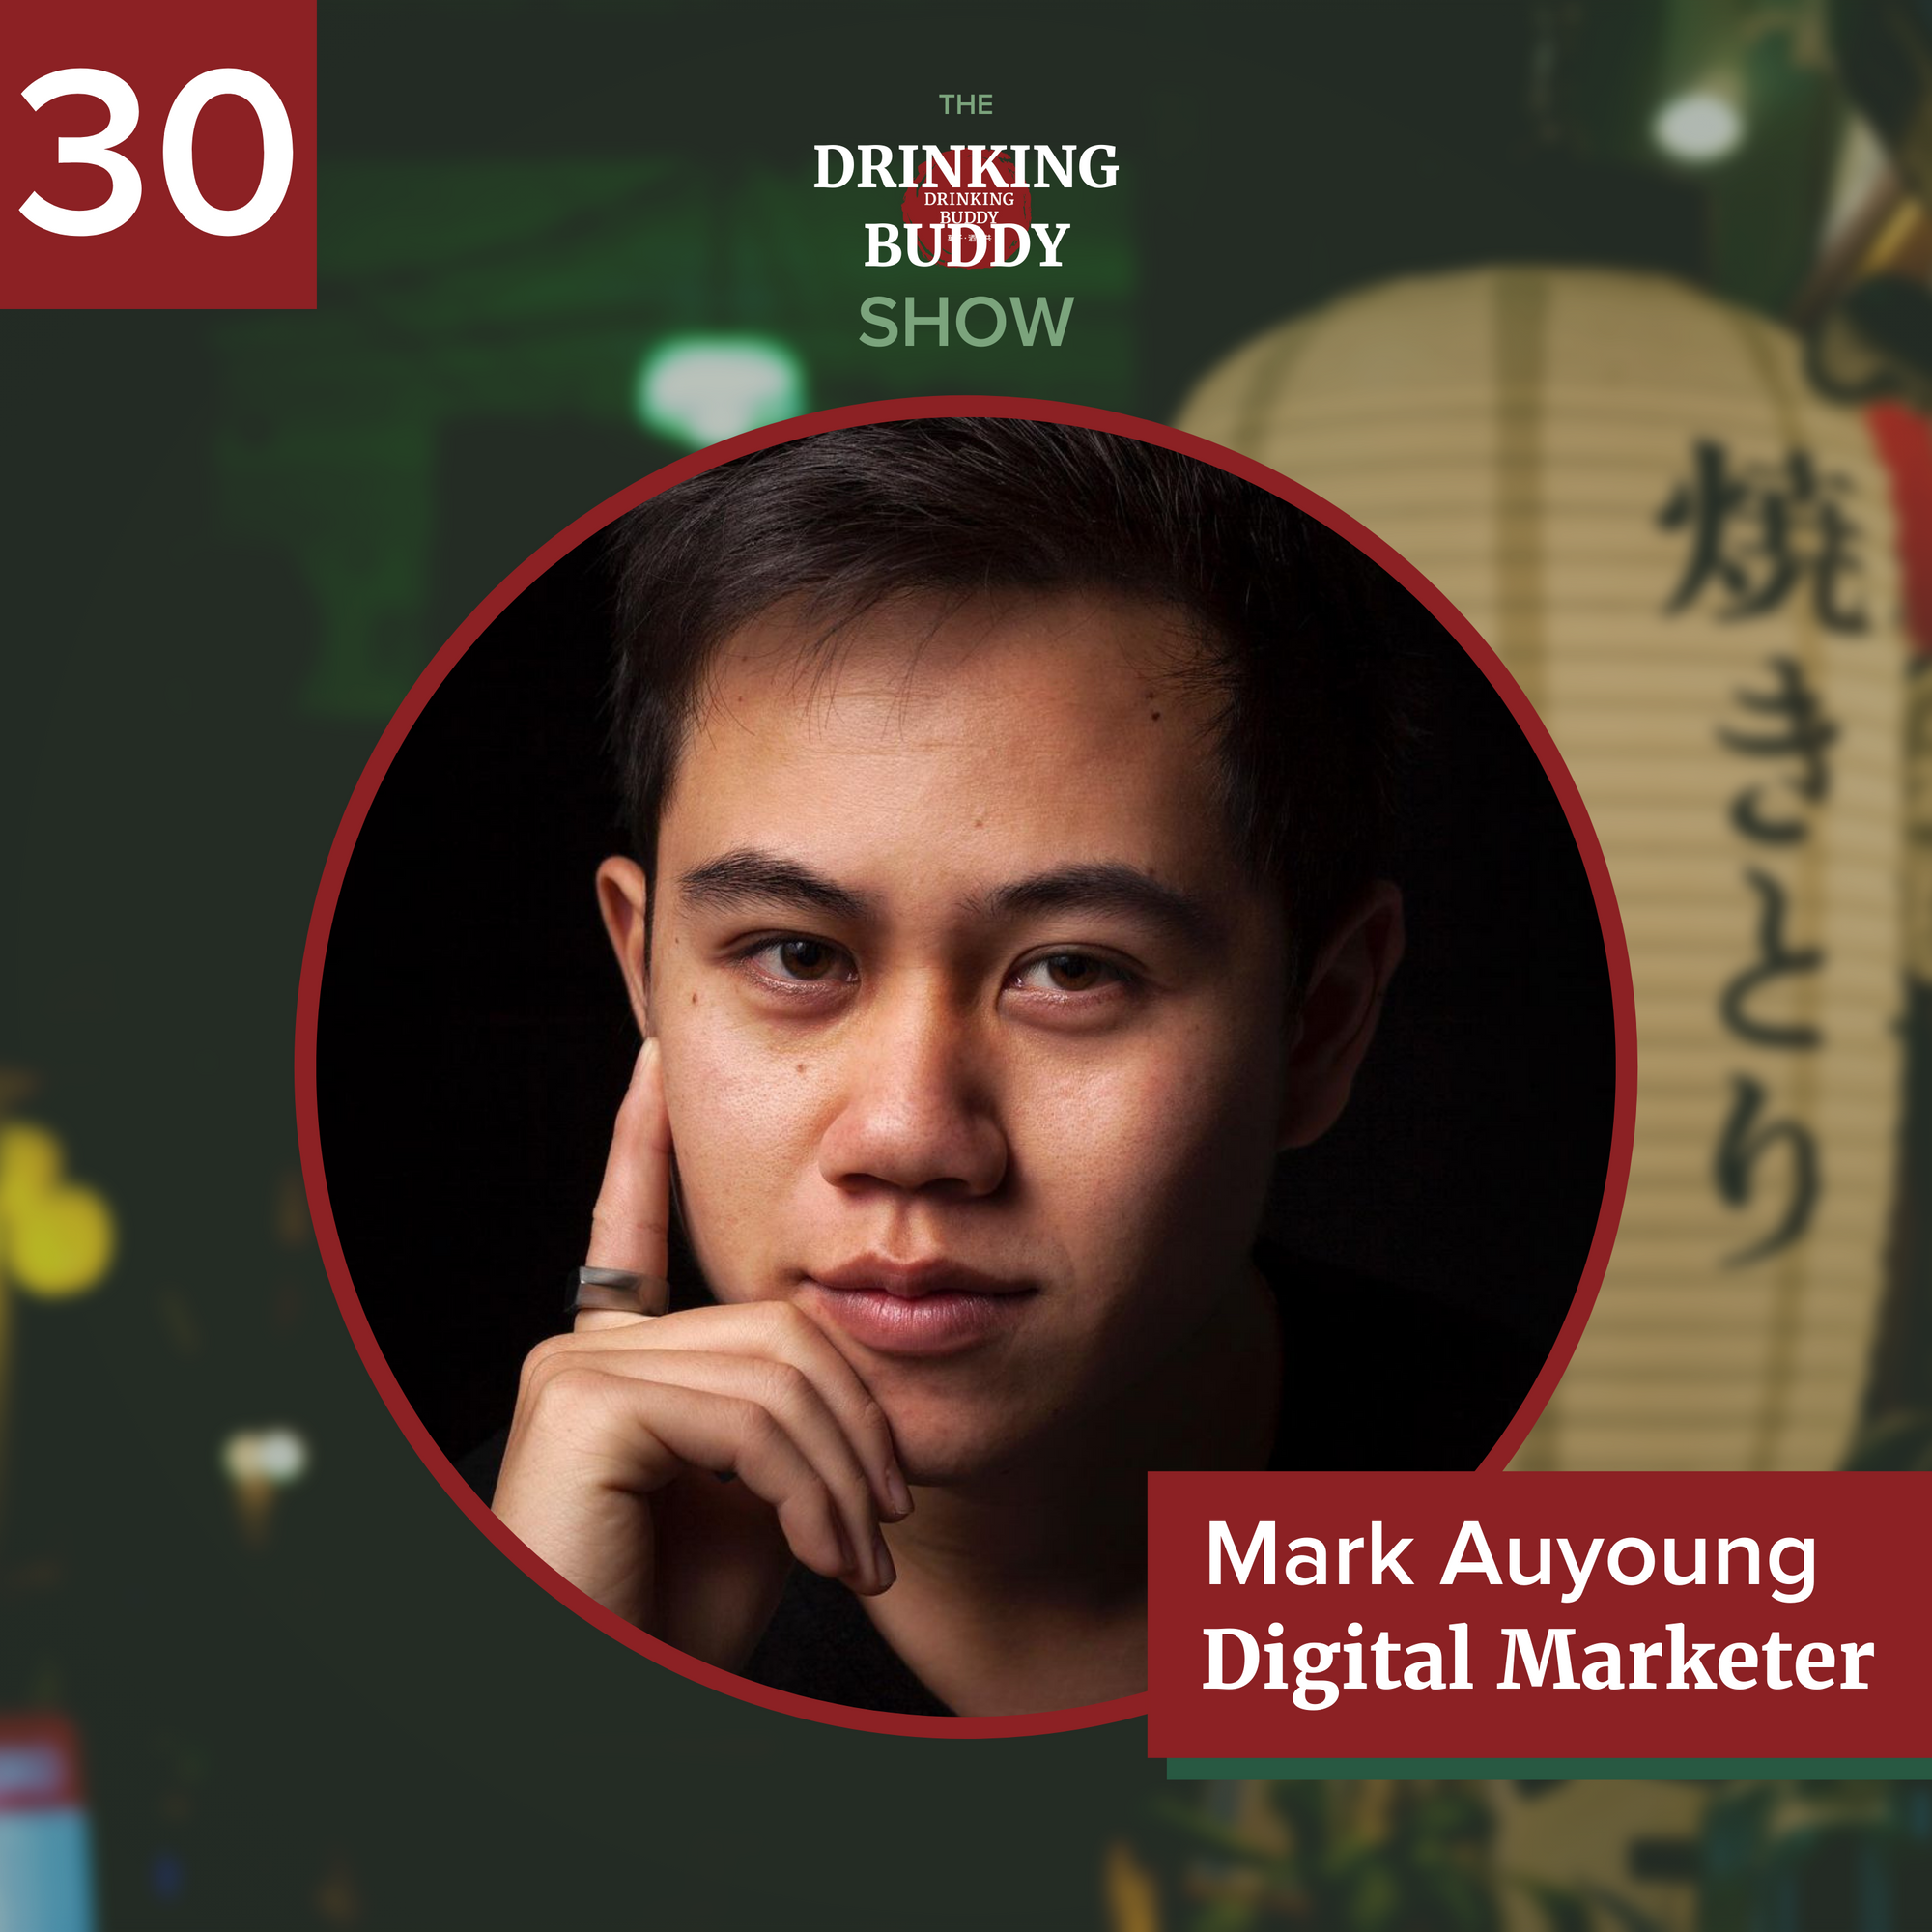 The Drinking Buddy Show Episode 30: Digital Marketer Mark Auyoung